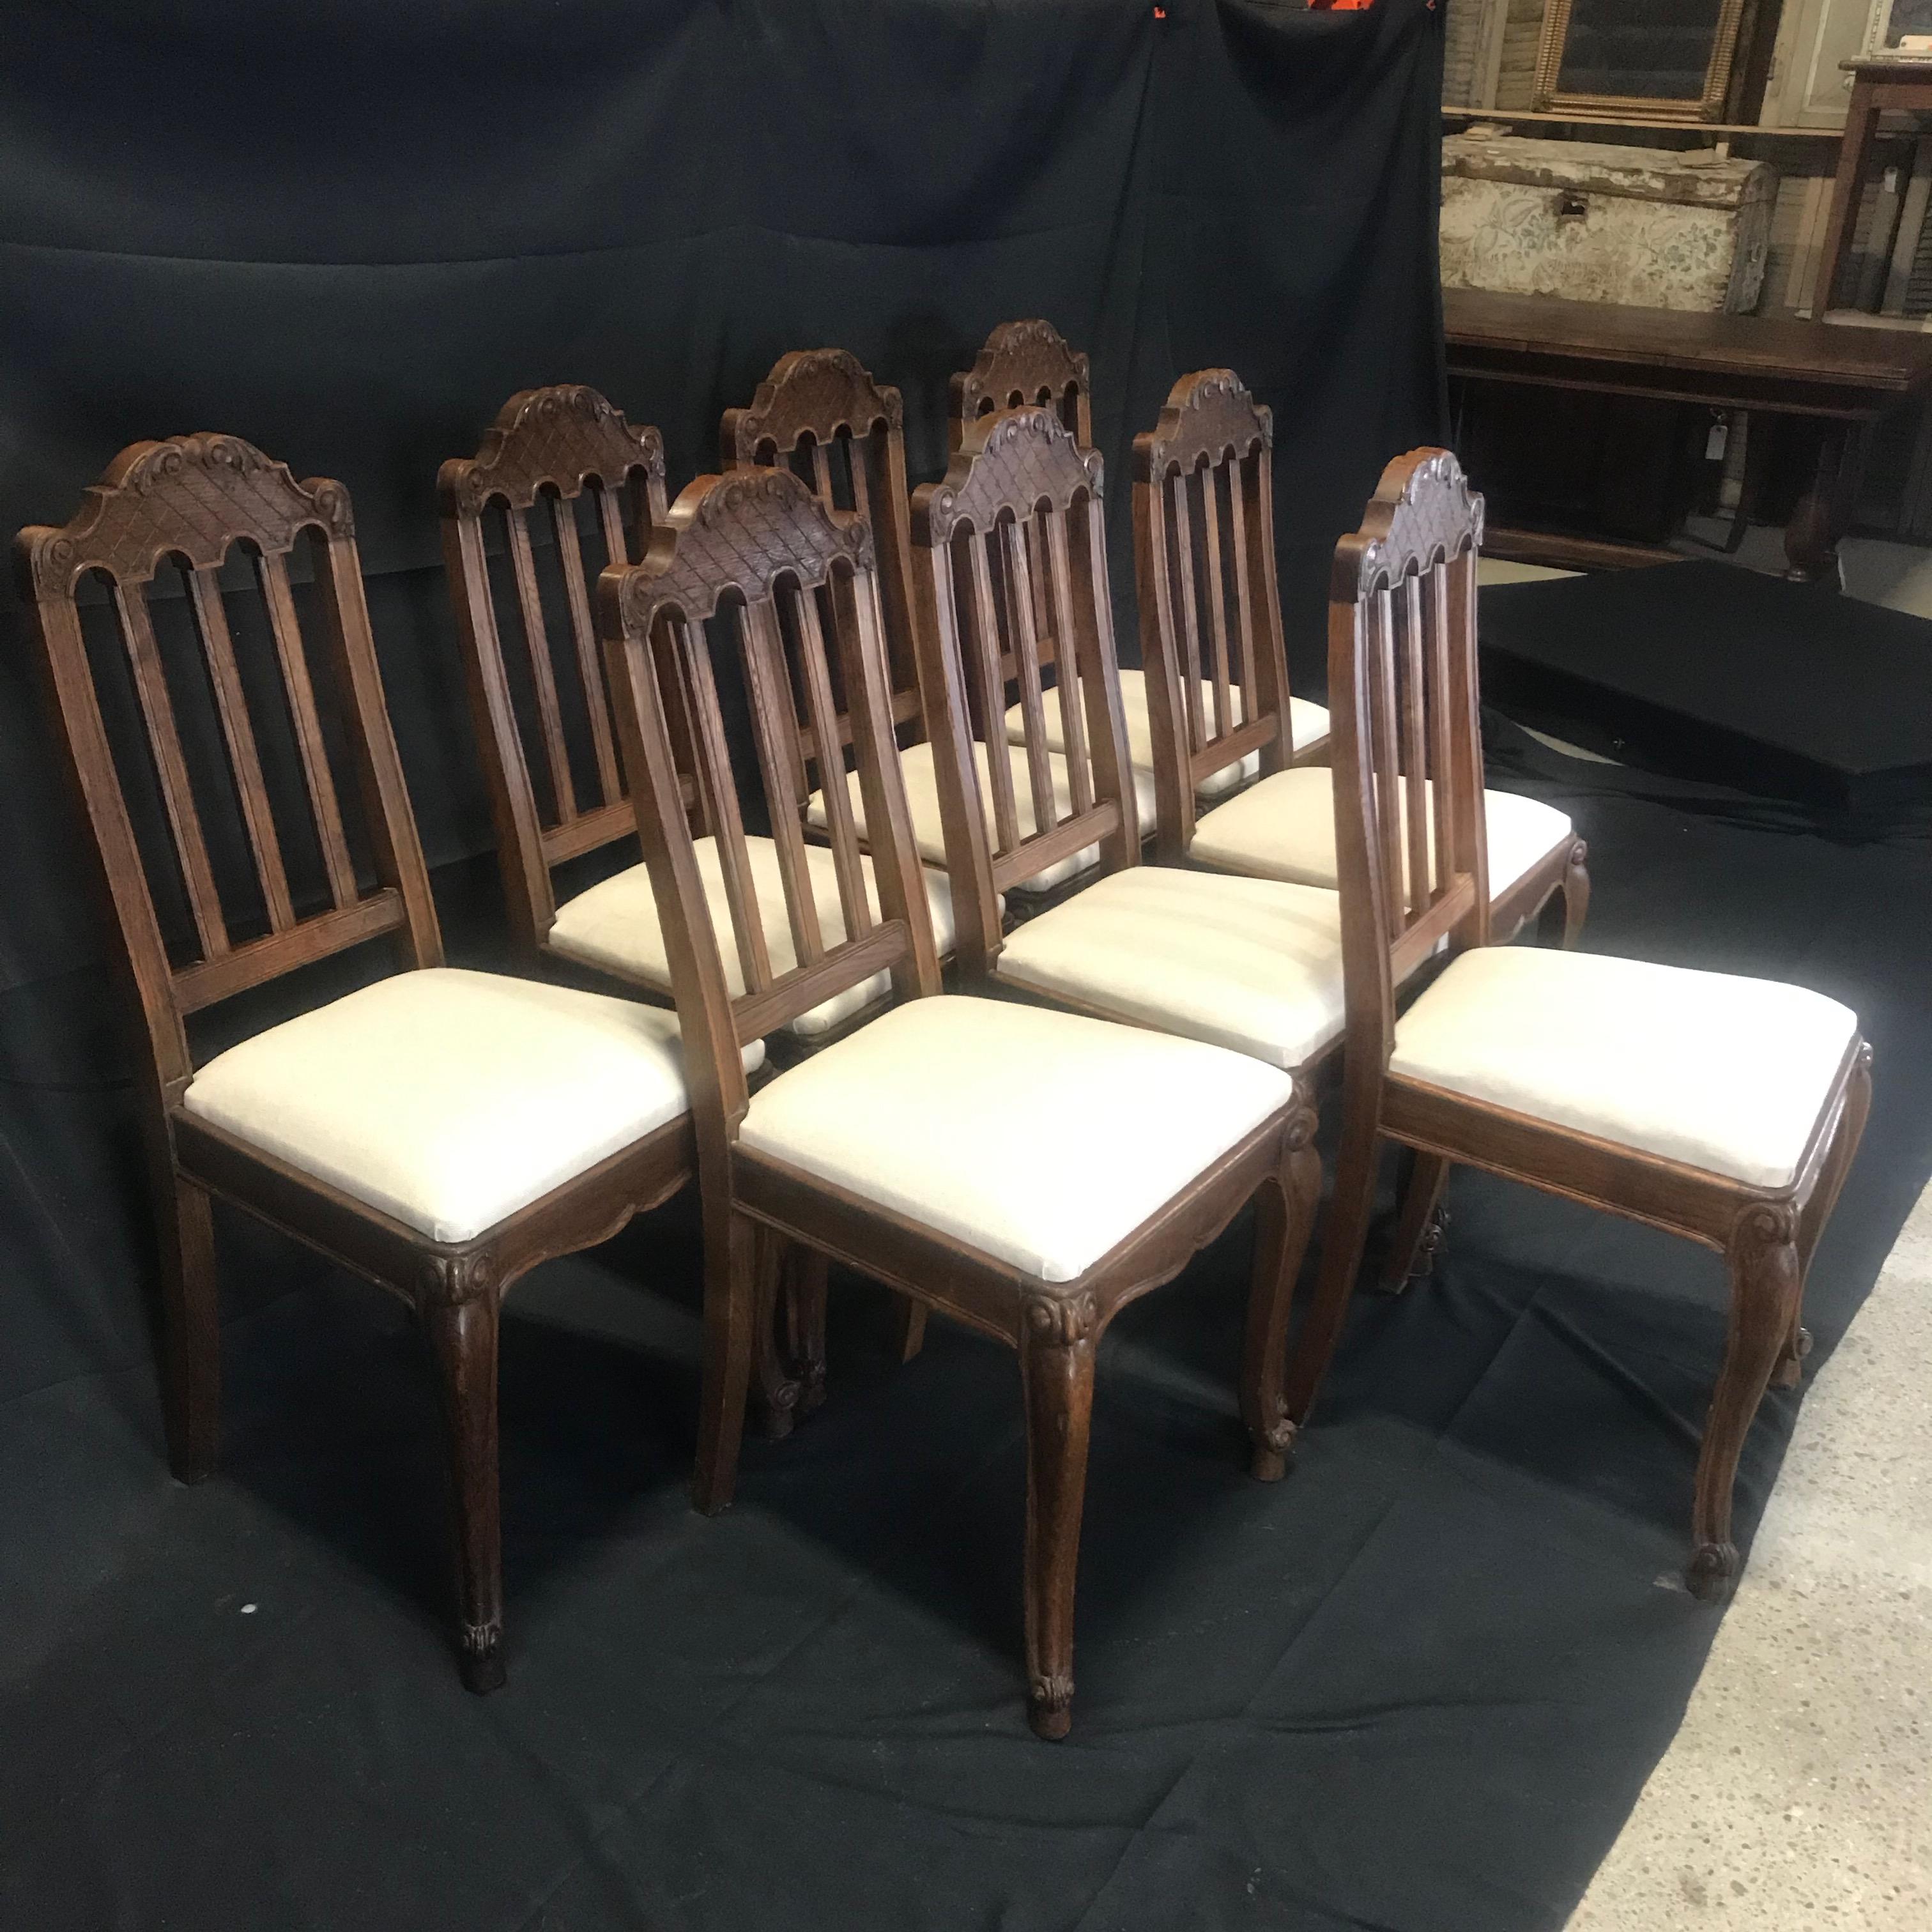 Really beautiful set of eight French oak intricately carved Louis XV chairs having snails carved into feet and top of legs. Top of backs are decorated with acanthus leaves and a diamond basketweave background. New upholstery in quality British pale